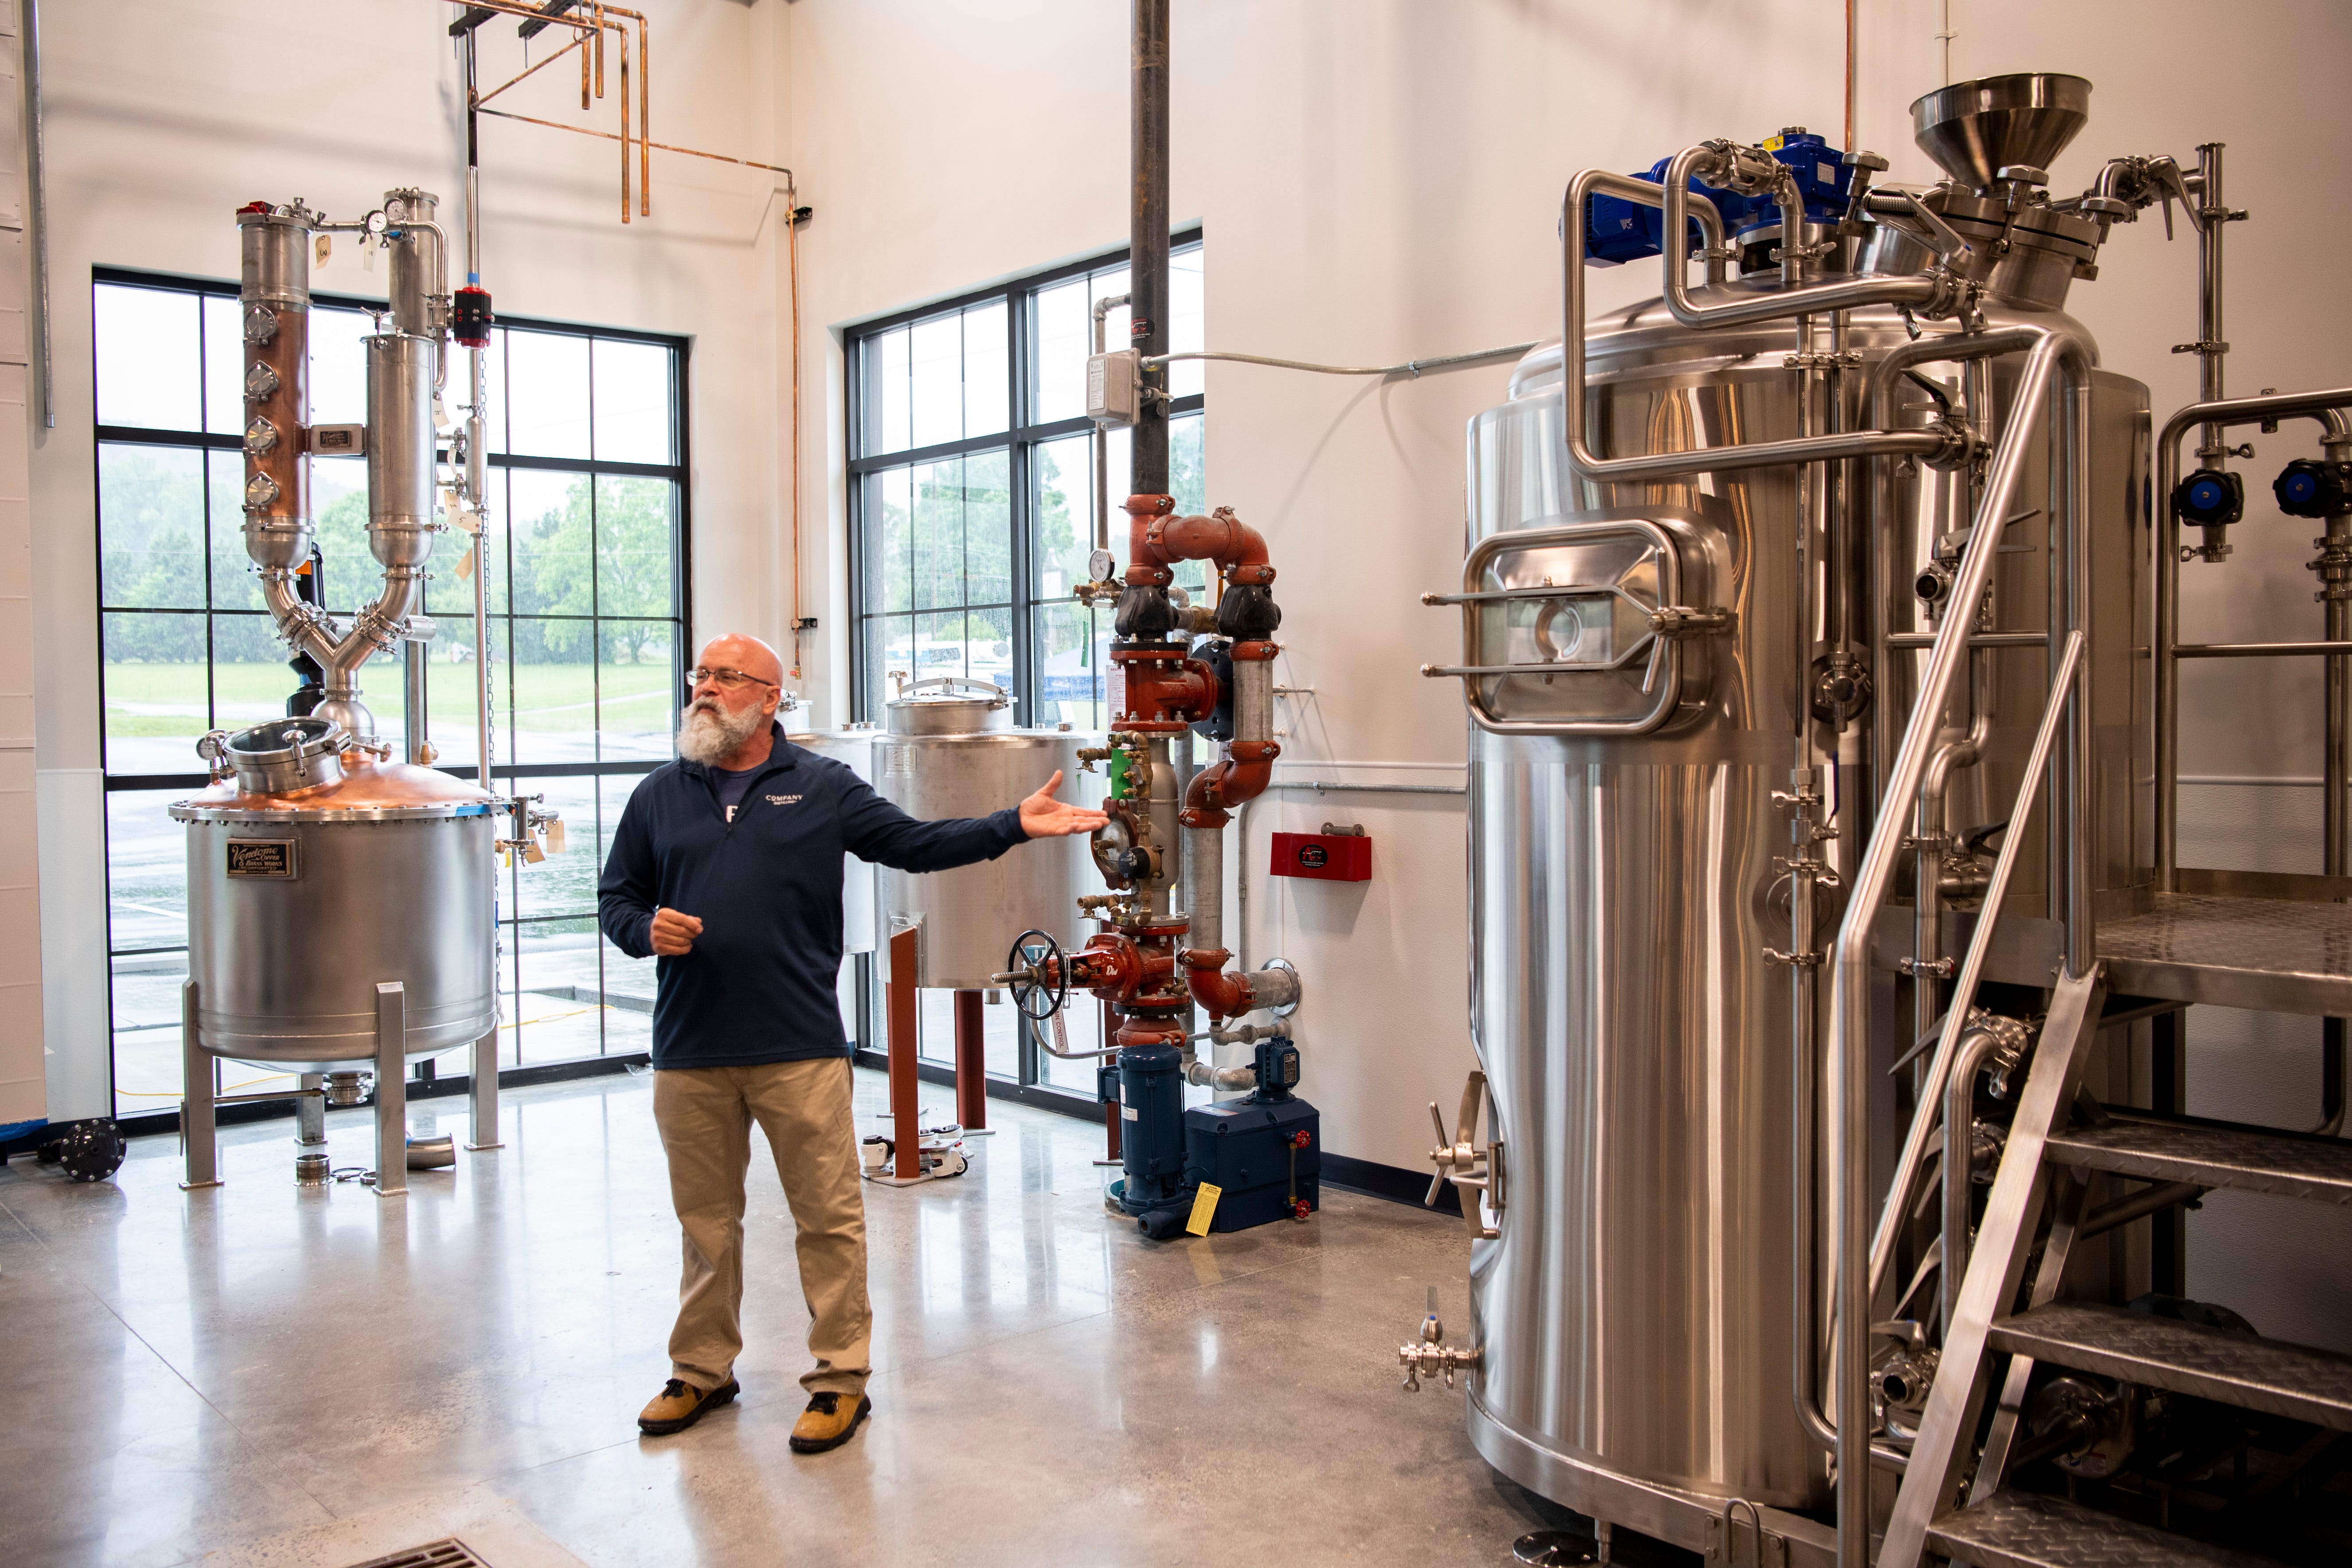 Company Distilling's director of production processing Kevin Smith gives a tour of the production area of the distillery's Townsend location on Monday, May 23, 2022.